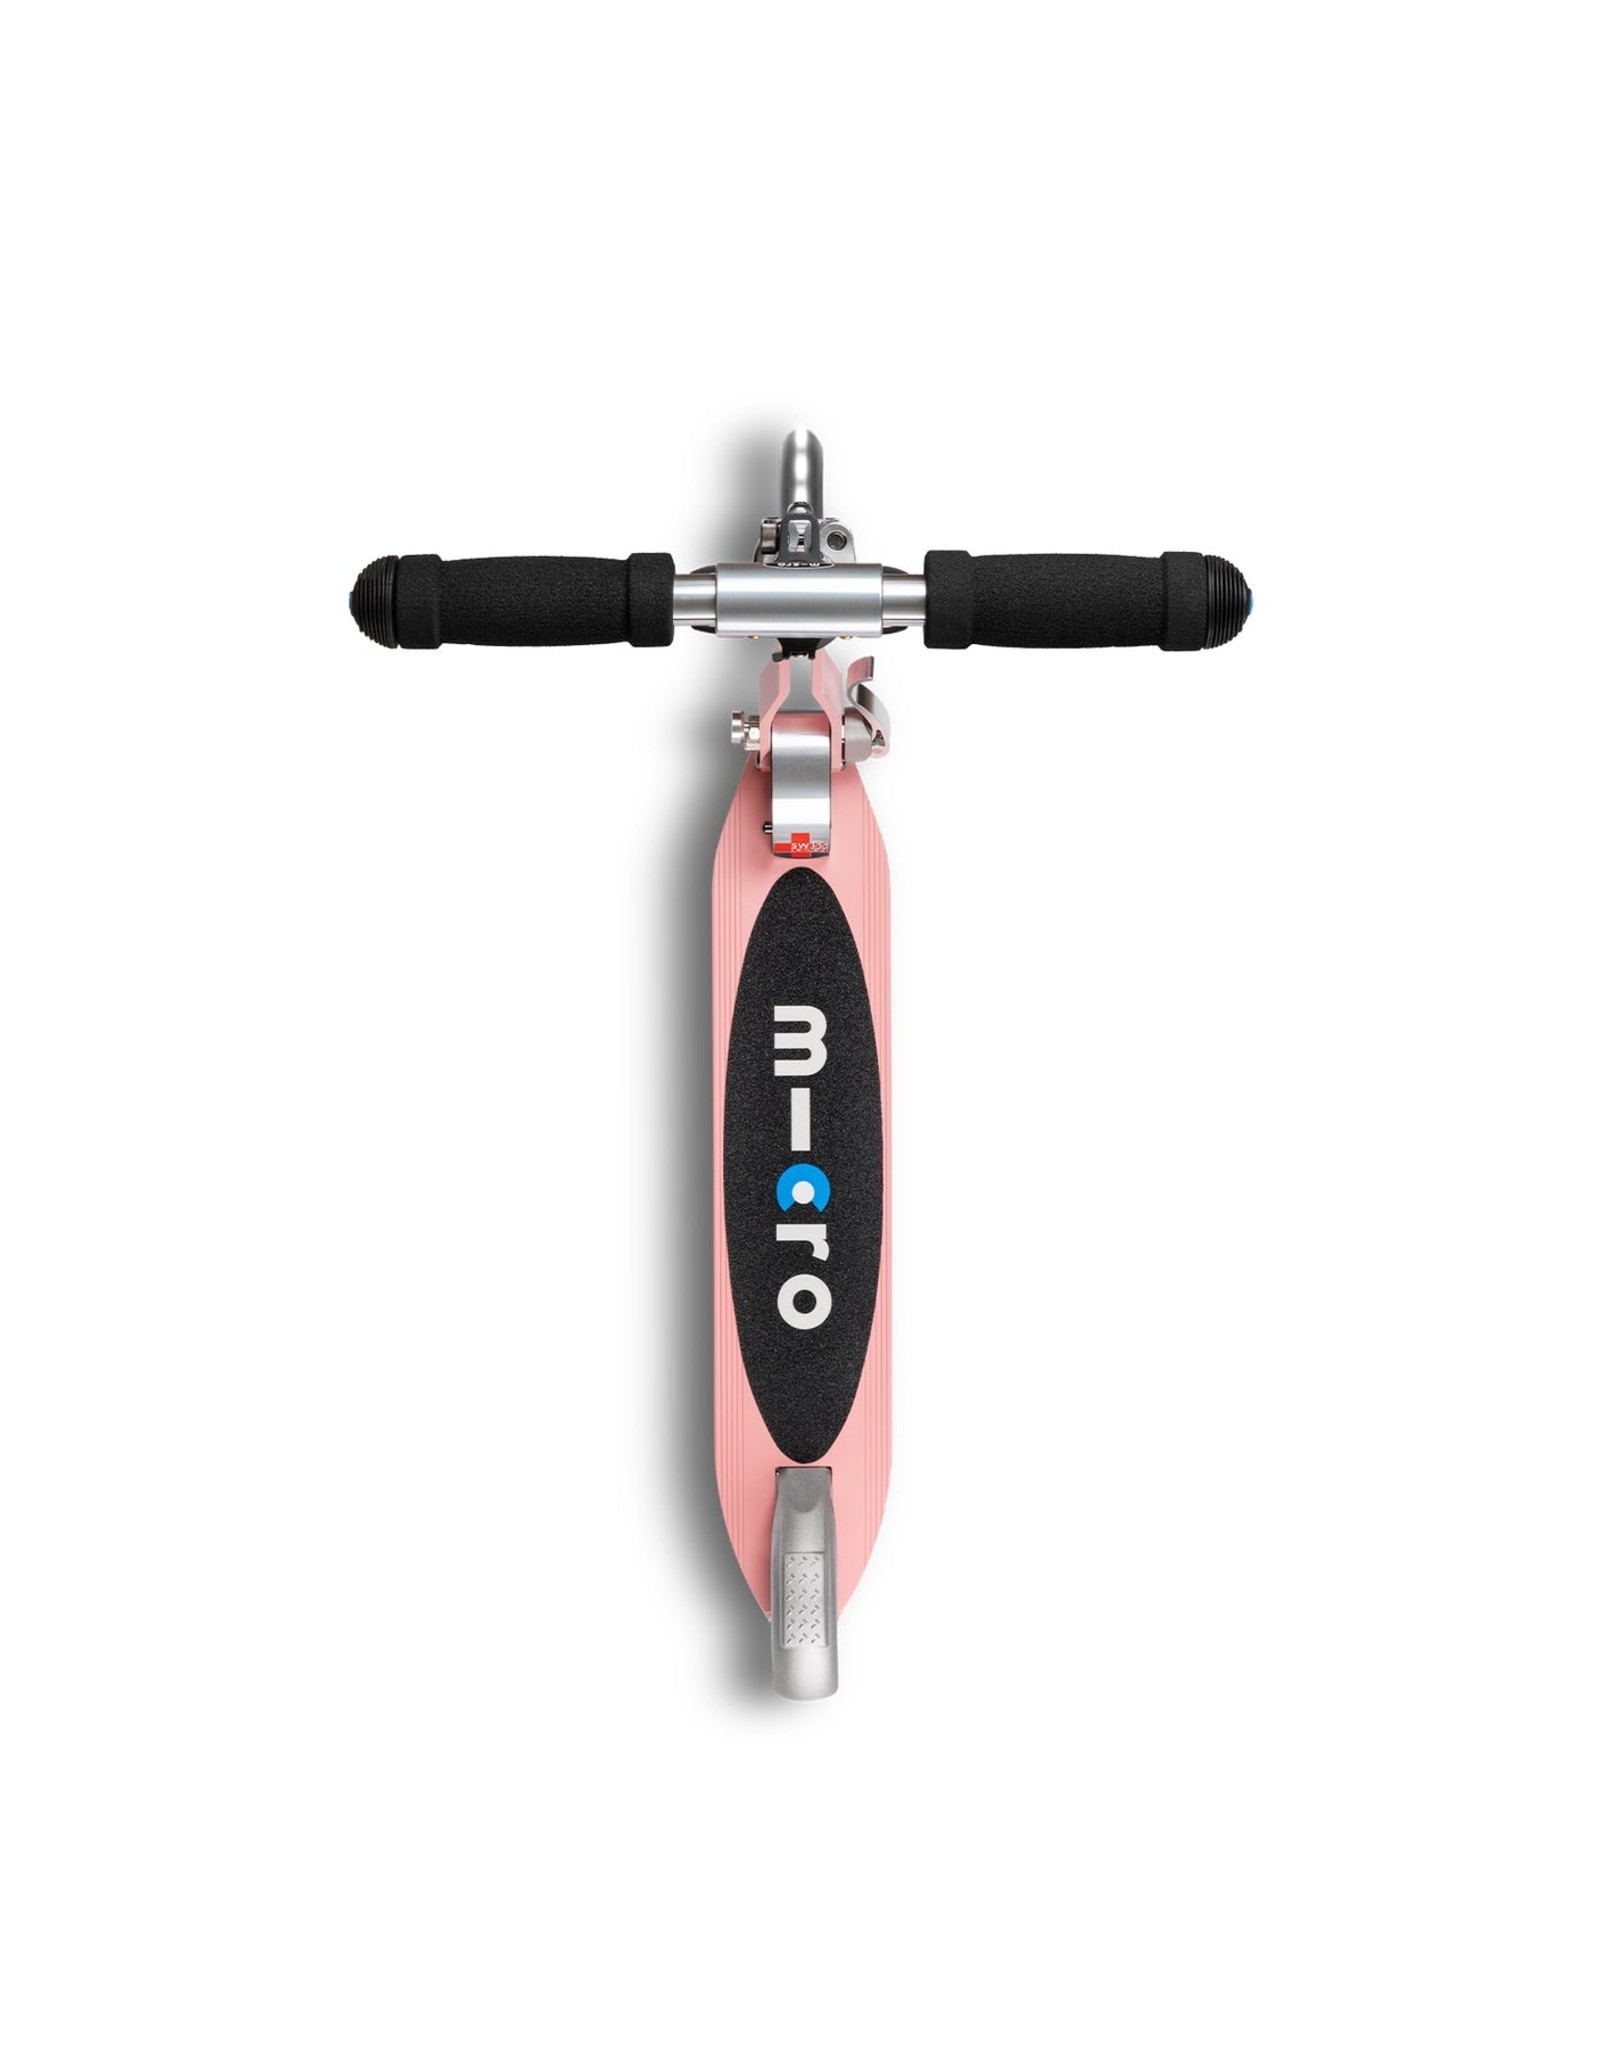 Micro Scooter Micro Sprite Scooter - Neon Rose LED